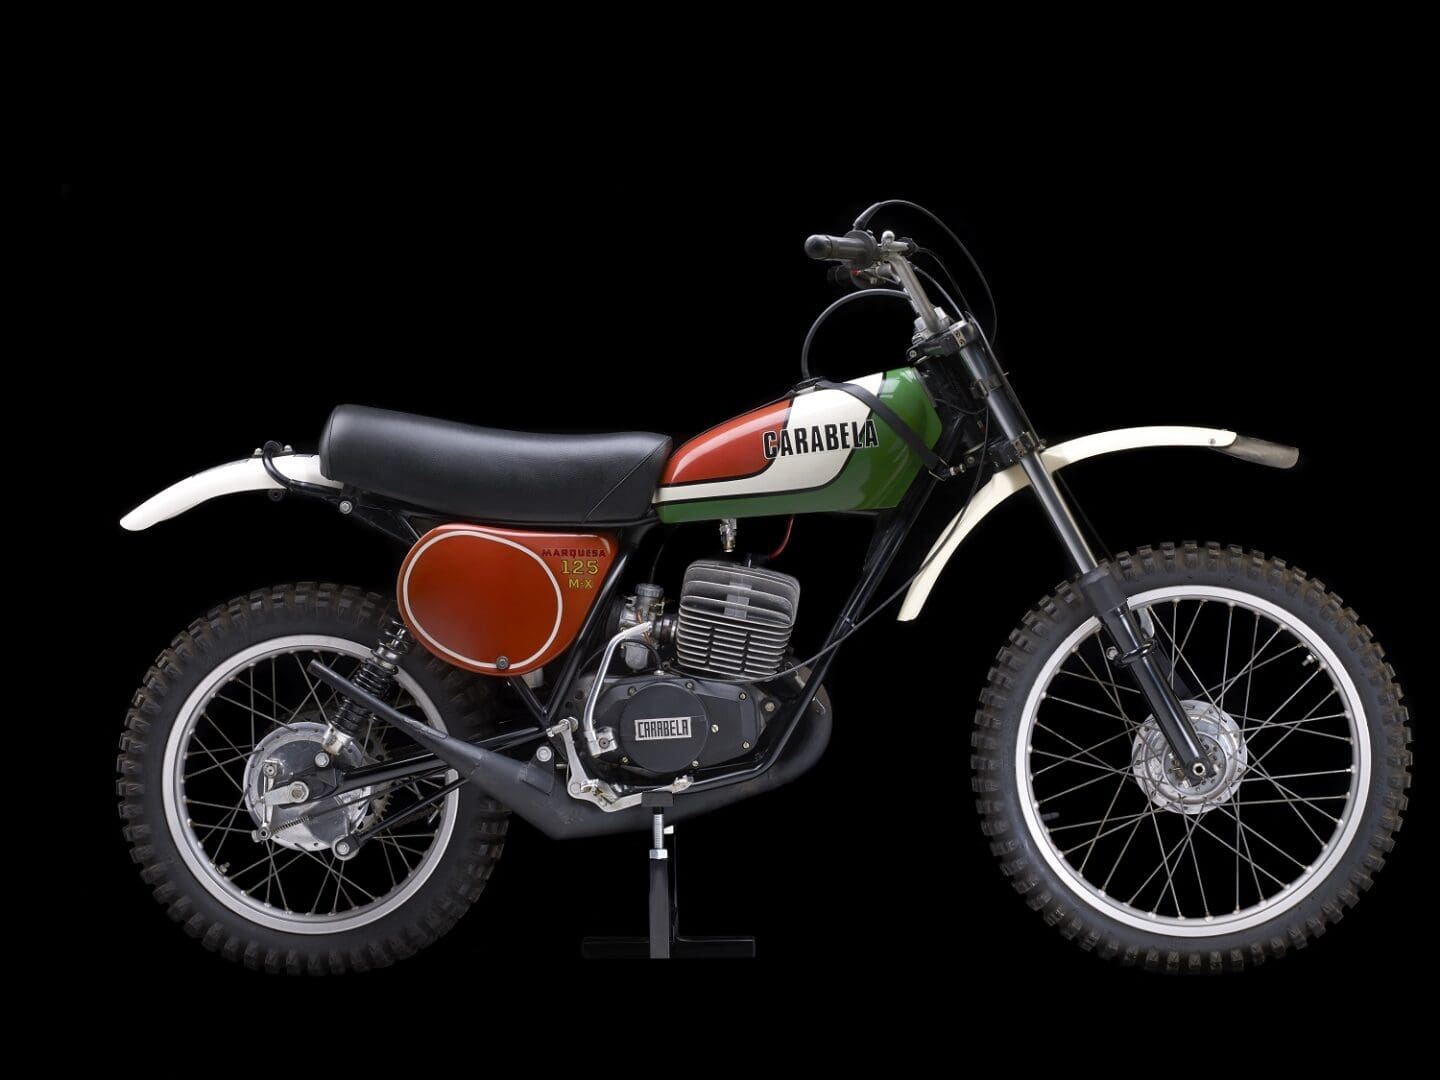 A green and red dirt bike on a black background.